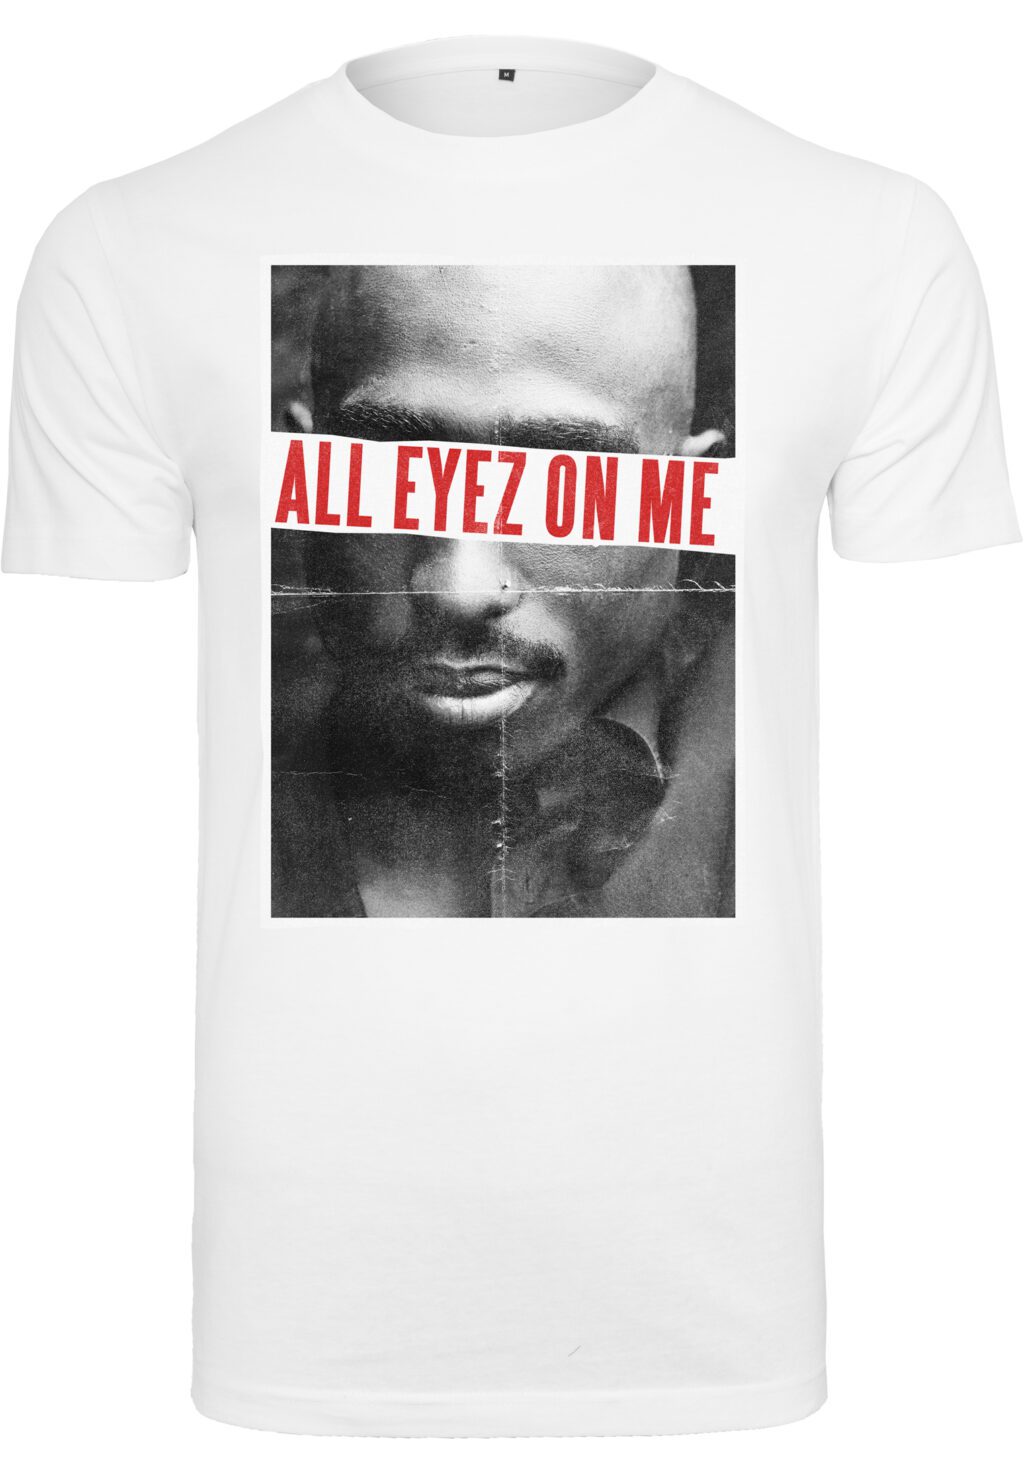 2Pac All Eyez On Me Tee white MT314